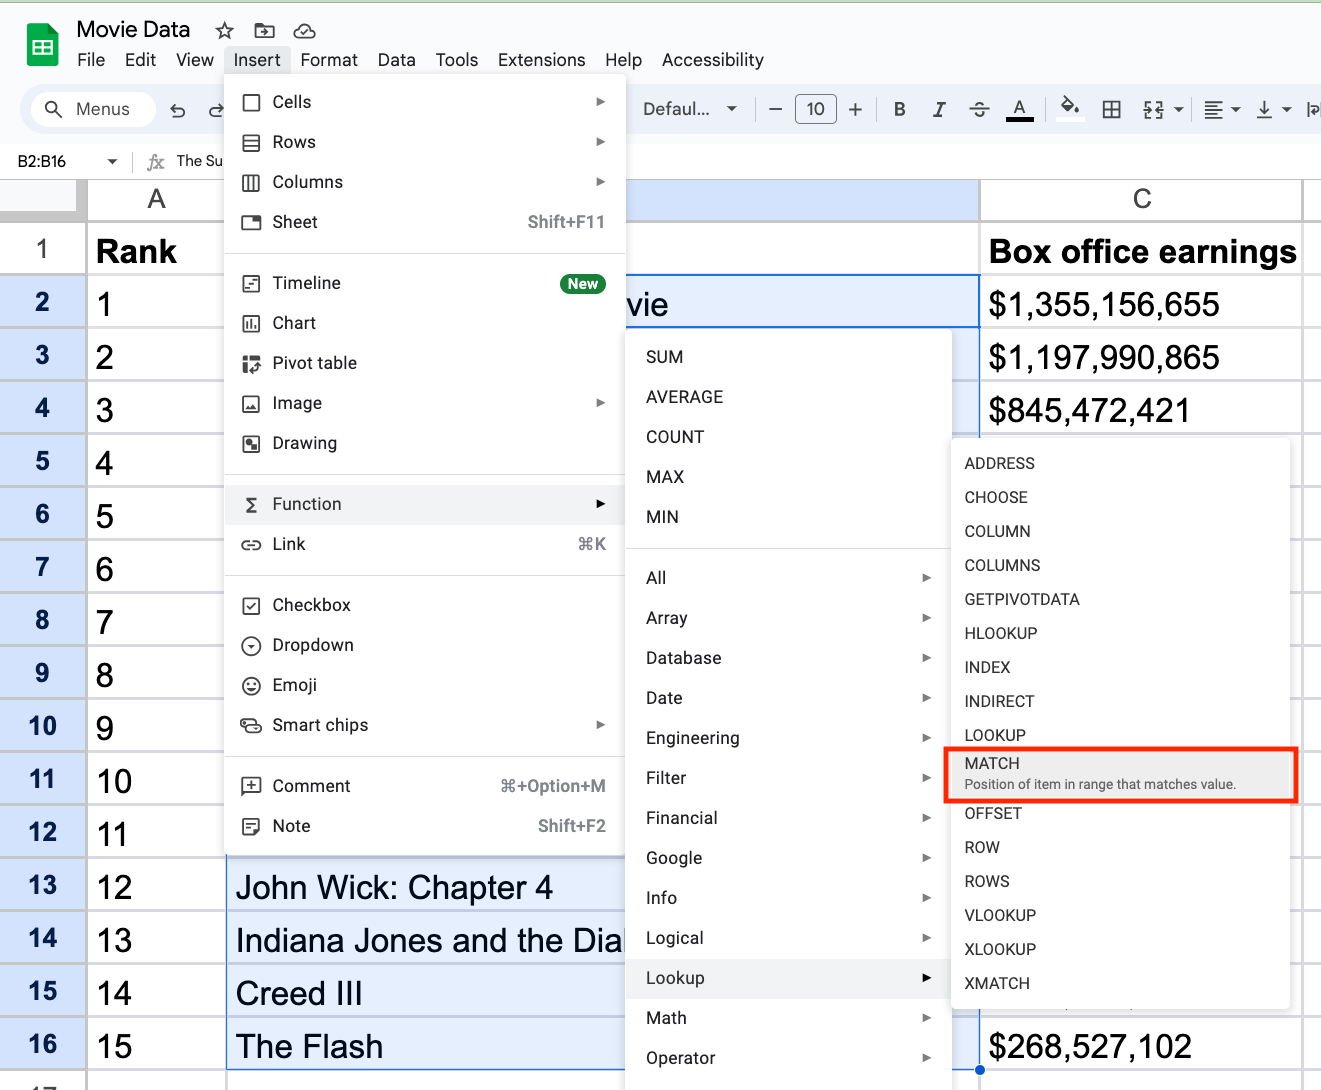 Screenshot of the location of the MATCH function in the Google Sheets toolbar menu.